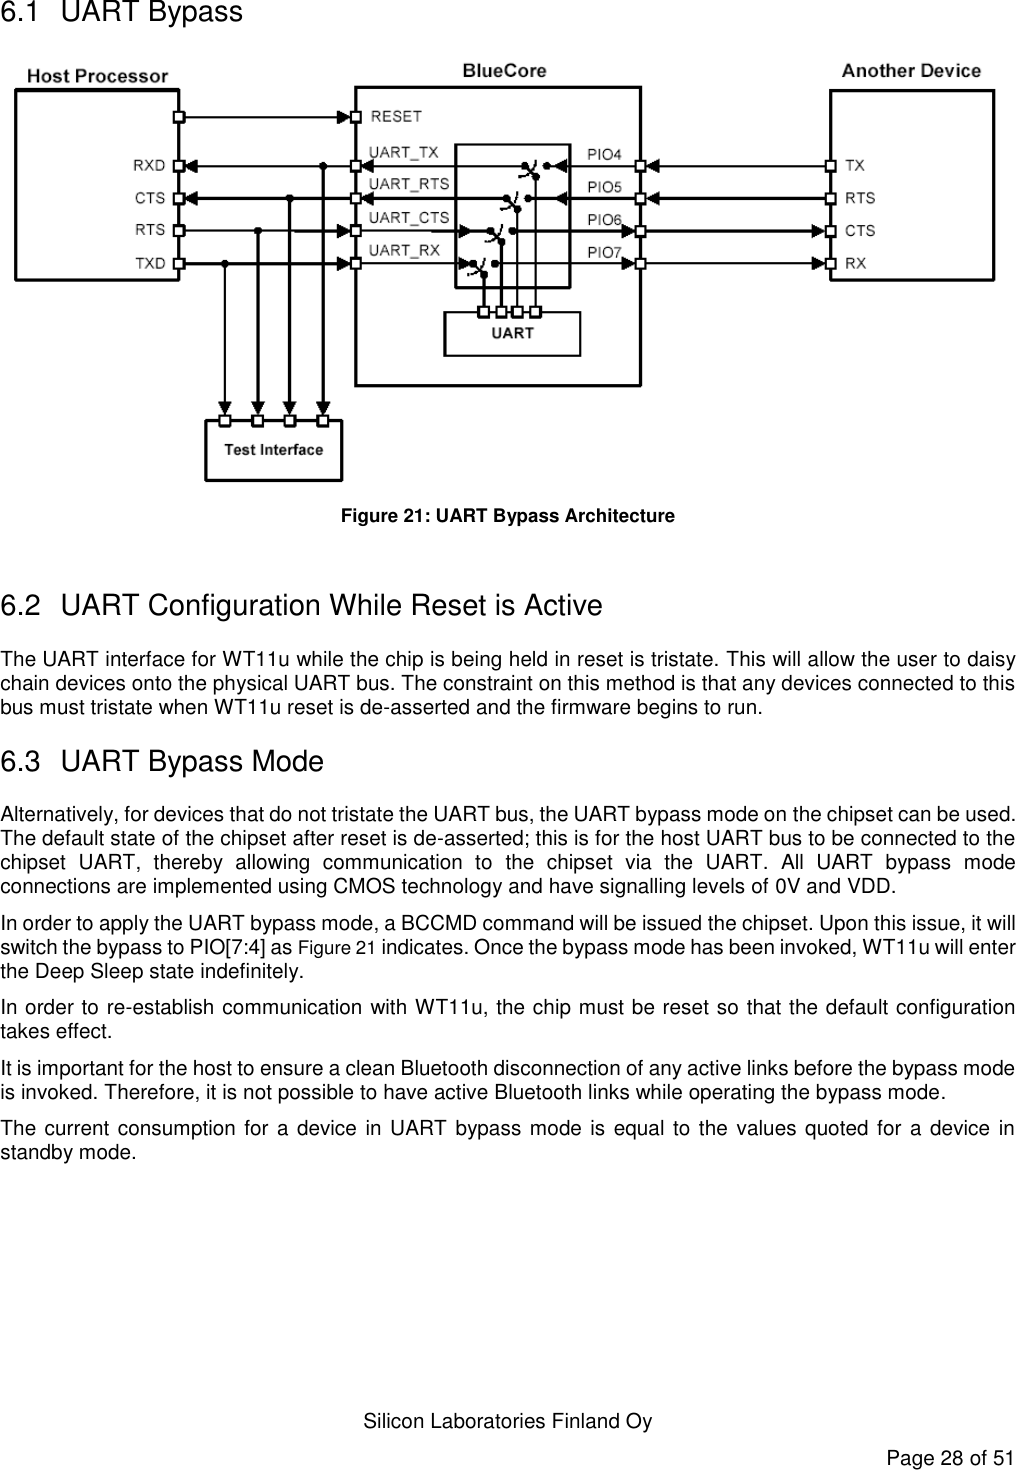   Silicon Laboratories Finland Oy Page 28 of 51 6.1  UART Bypass  Figure 21: UART Bypass Architecture  6.2  UART Configuration While Reset is Active The UART interface for WT11u while the chip is being held in reset is tristate. This will allow the user to daisy chain devices onto the physical UART bus. The constraint on this method is that any devices connected to this bus must tristate when WT11u reset is de-asserted and the firmware begins to run. 6.3  UART Bypass Mode Alternatively, for devices that do not tristate the UART bus, the UART bypass mode on the chipset can be used. The default state of the chipset after reset is de-asserted; this is for the host UART bus to be connected to the chipset  UART,  thereby  allowing  communication  to  the  chipset  via  the  UART.  All  UART  bypass  mode connections are implemented using CMOS technology and have signalling levels of 0V and VDD. In order to apply the UART bypass mode, a BCCMD command will be issued the chipset. Upon this issue, it will switch the bypass to PIO[7:4] as Figure 21 indicates. Once the bypass mode has been invoked, WT11u will enter the Deep Sleep state indefinitely. In order to re-establish communication with WT11u, the chip must be reset so that the default configuration takes effect. It is important for the host to ensure a clean Bluetooth disconnection of any active links before the bypass mode is invoked. Therefore, it is not possible to have active Bluetooth links while operating the bypass mode. The current consumption for a device in UART  bypass mode is equal to the values quoted for  a device  in standby mode. 